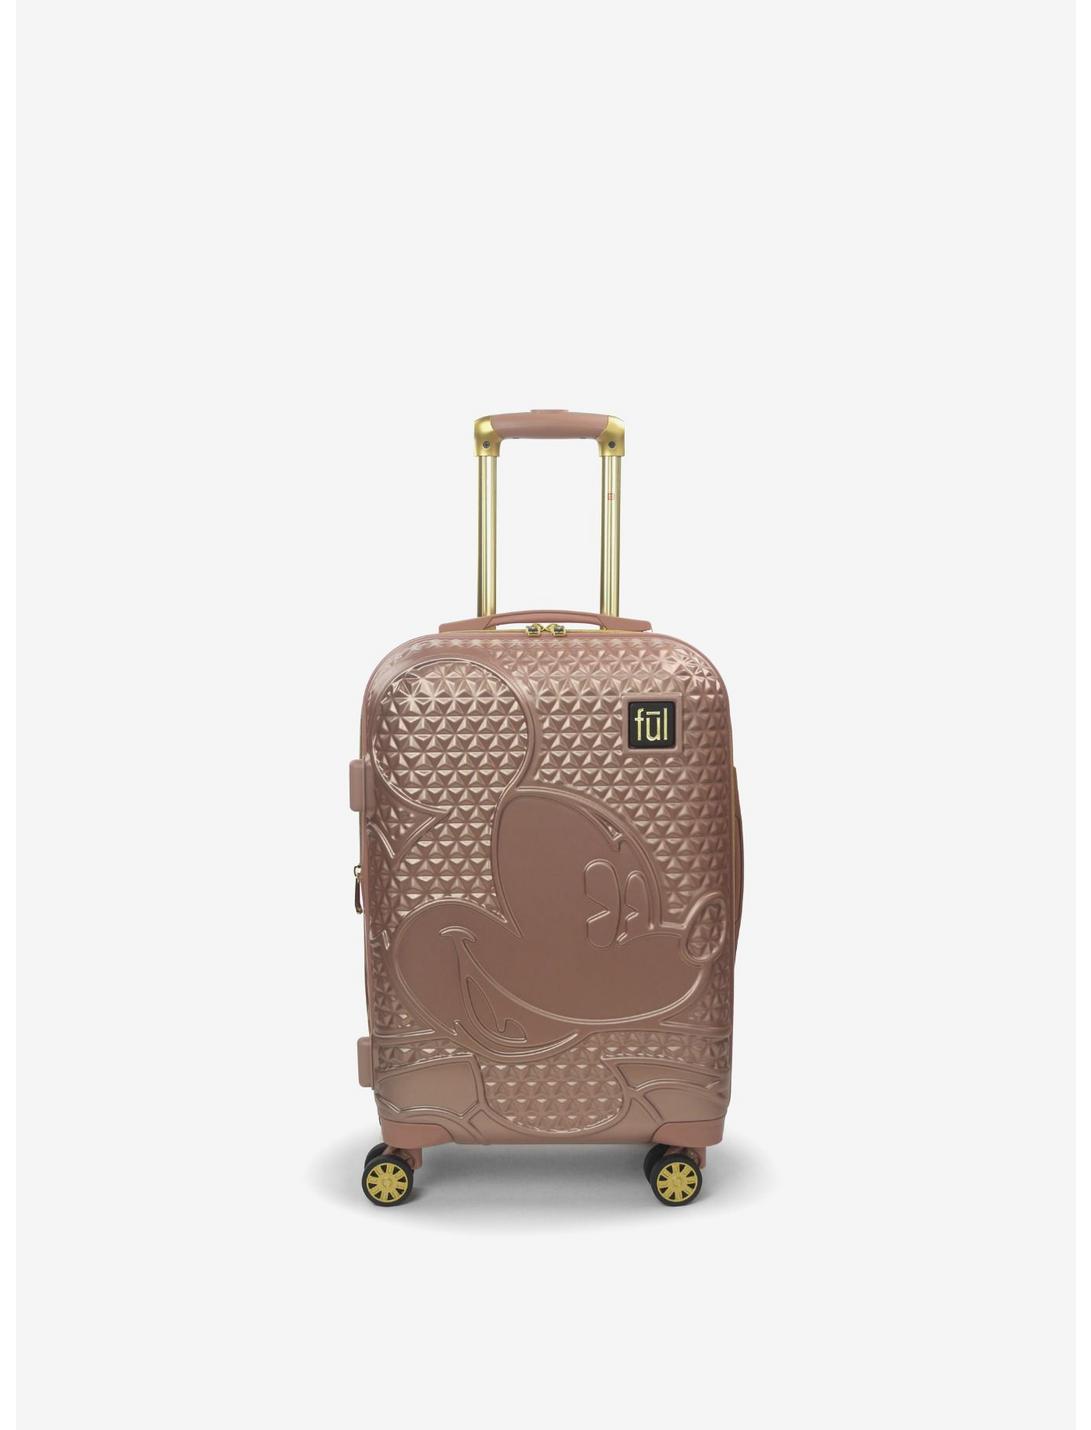 FUL Disney Mickey Mouse Rose Gold Textured 21 Inch Hardside Rolling Luggage, , hi-res